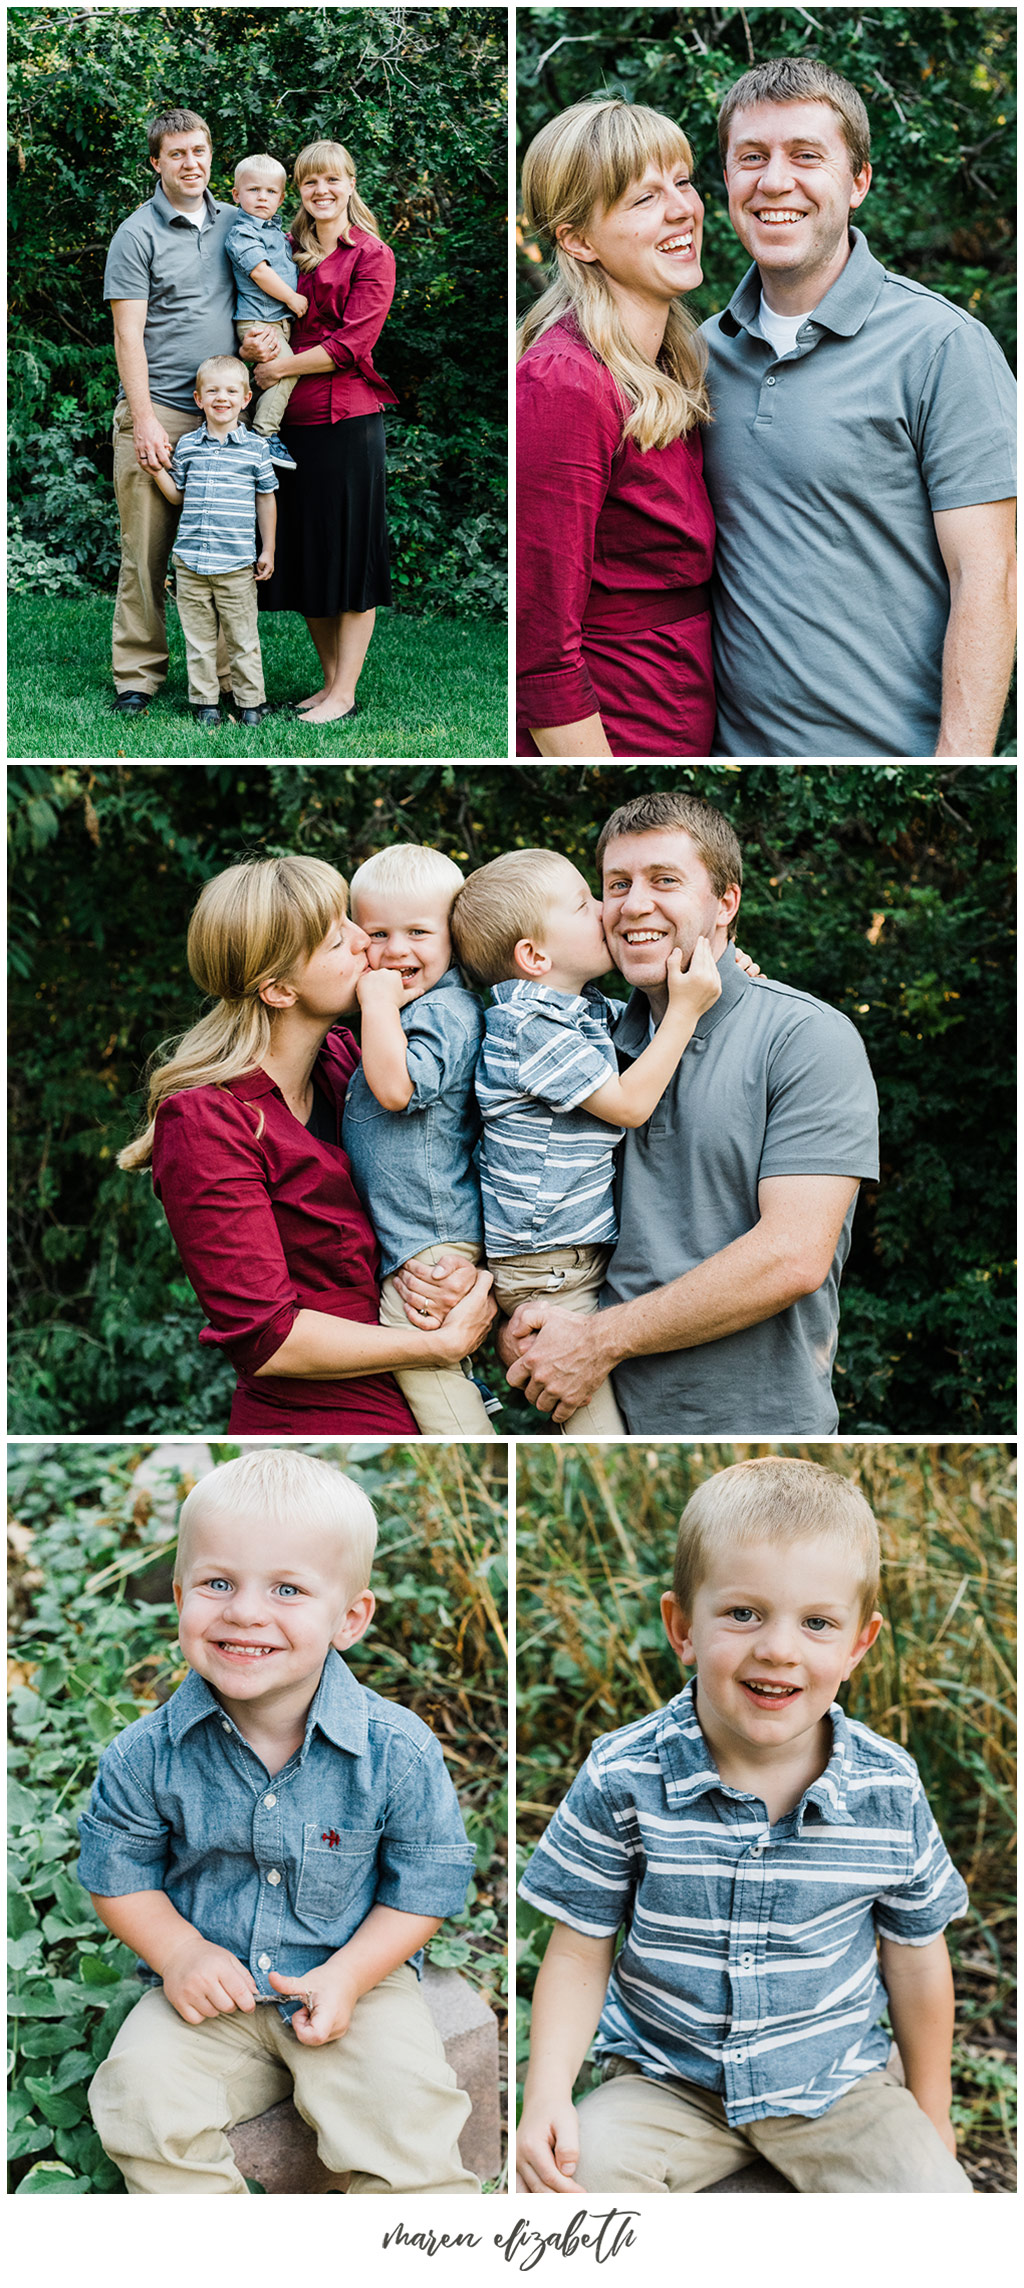 Utah extended family pictures by Maren Elizabeth Photography taken in a neighbor's driveway. Beautiful photo locations can be found anywhere if you get creative. | Arizona Family Photographer